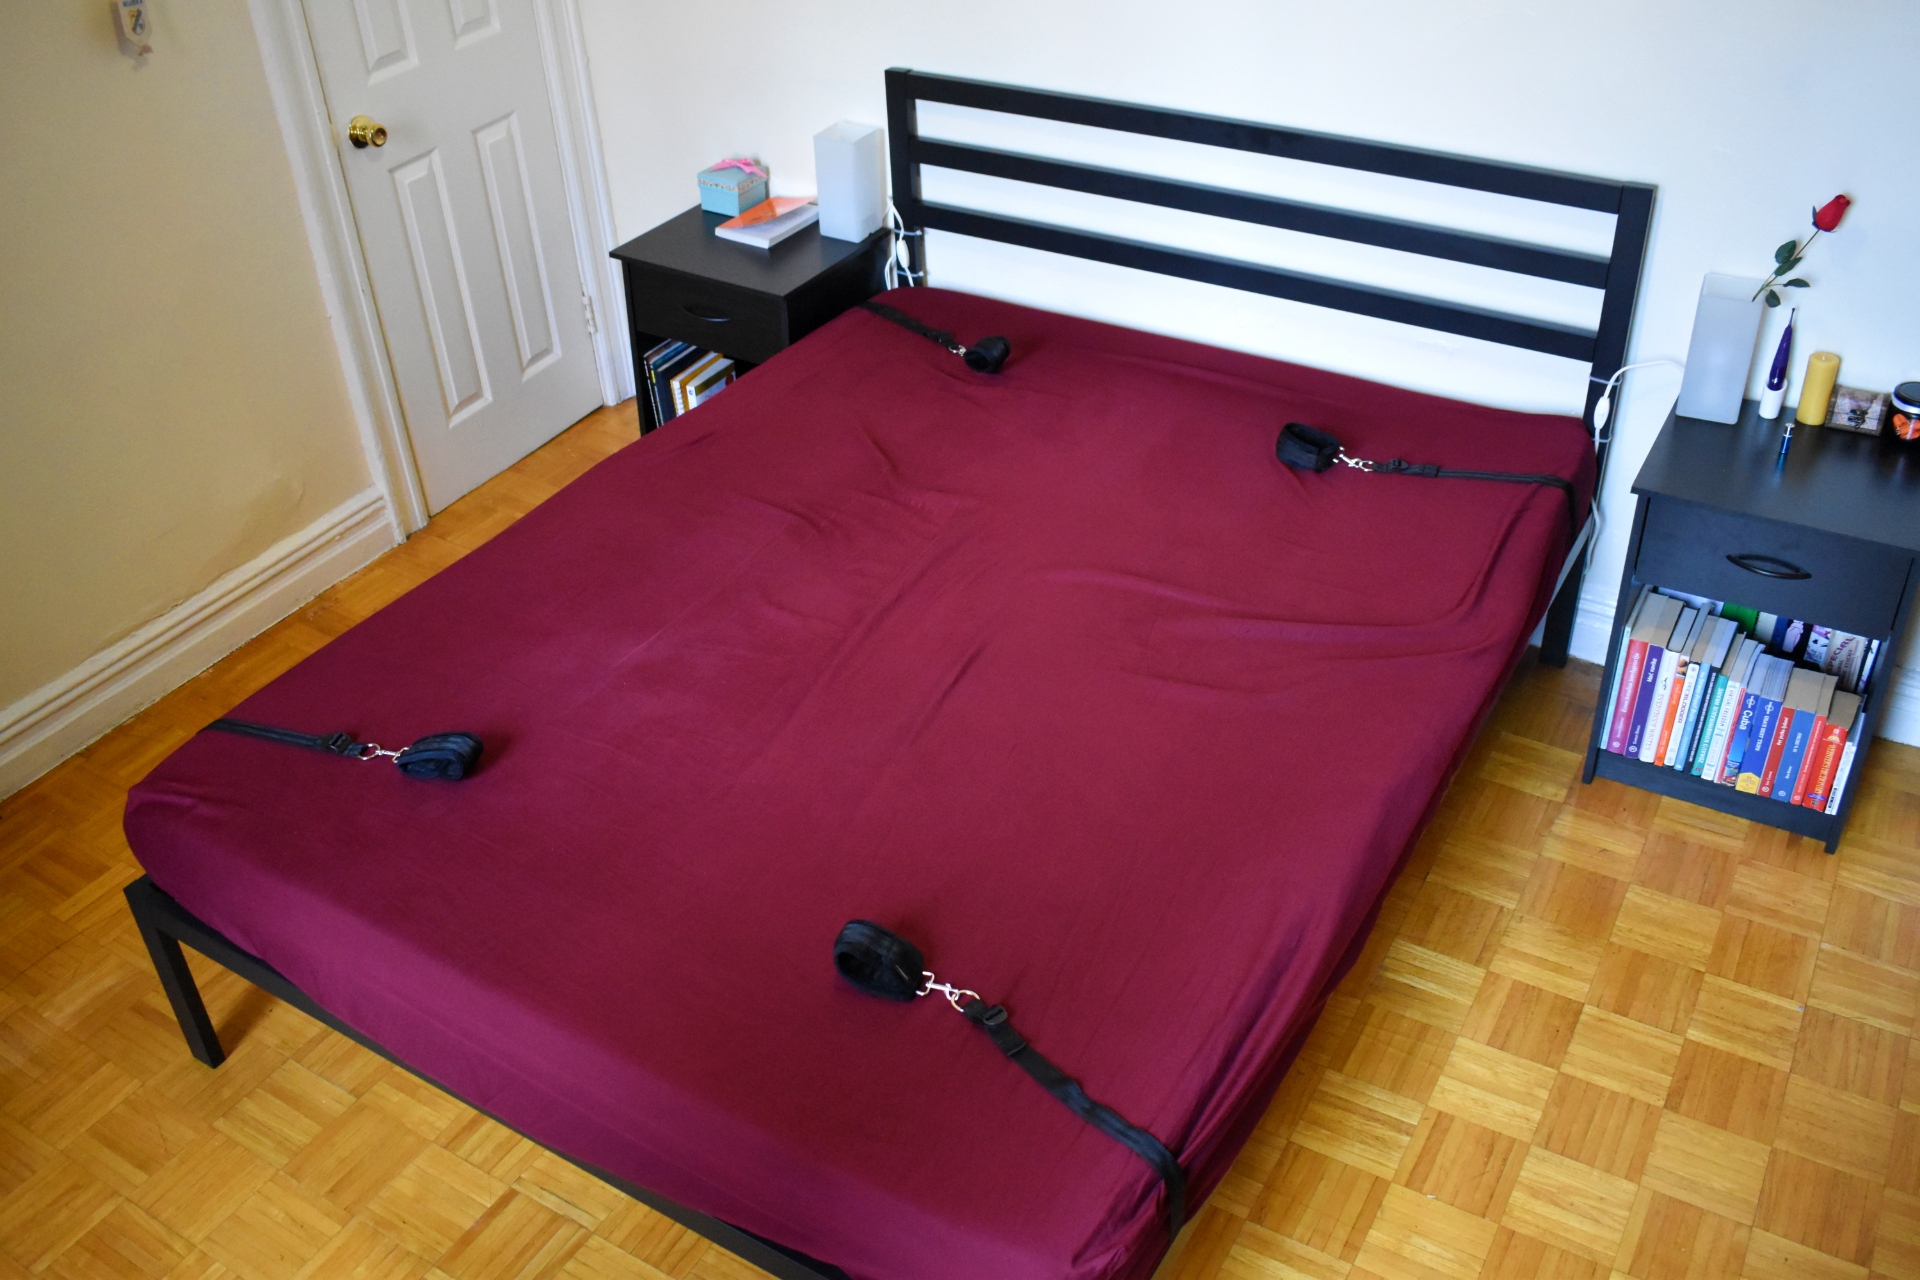 Review Under The Bed Restraint System By Sportsheets Spices Of Lust